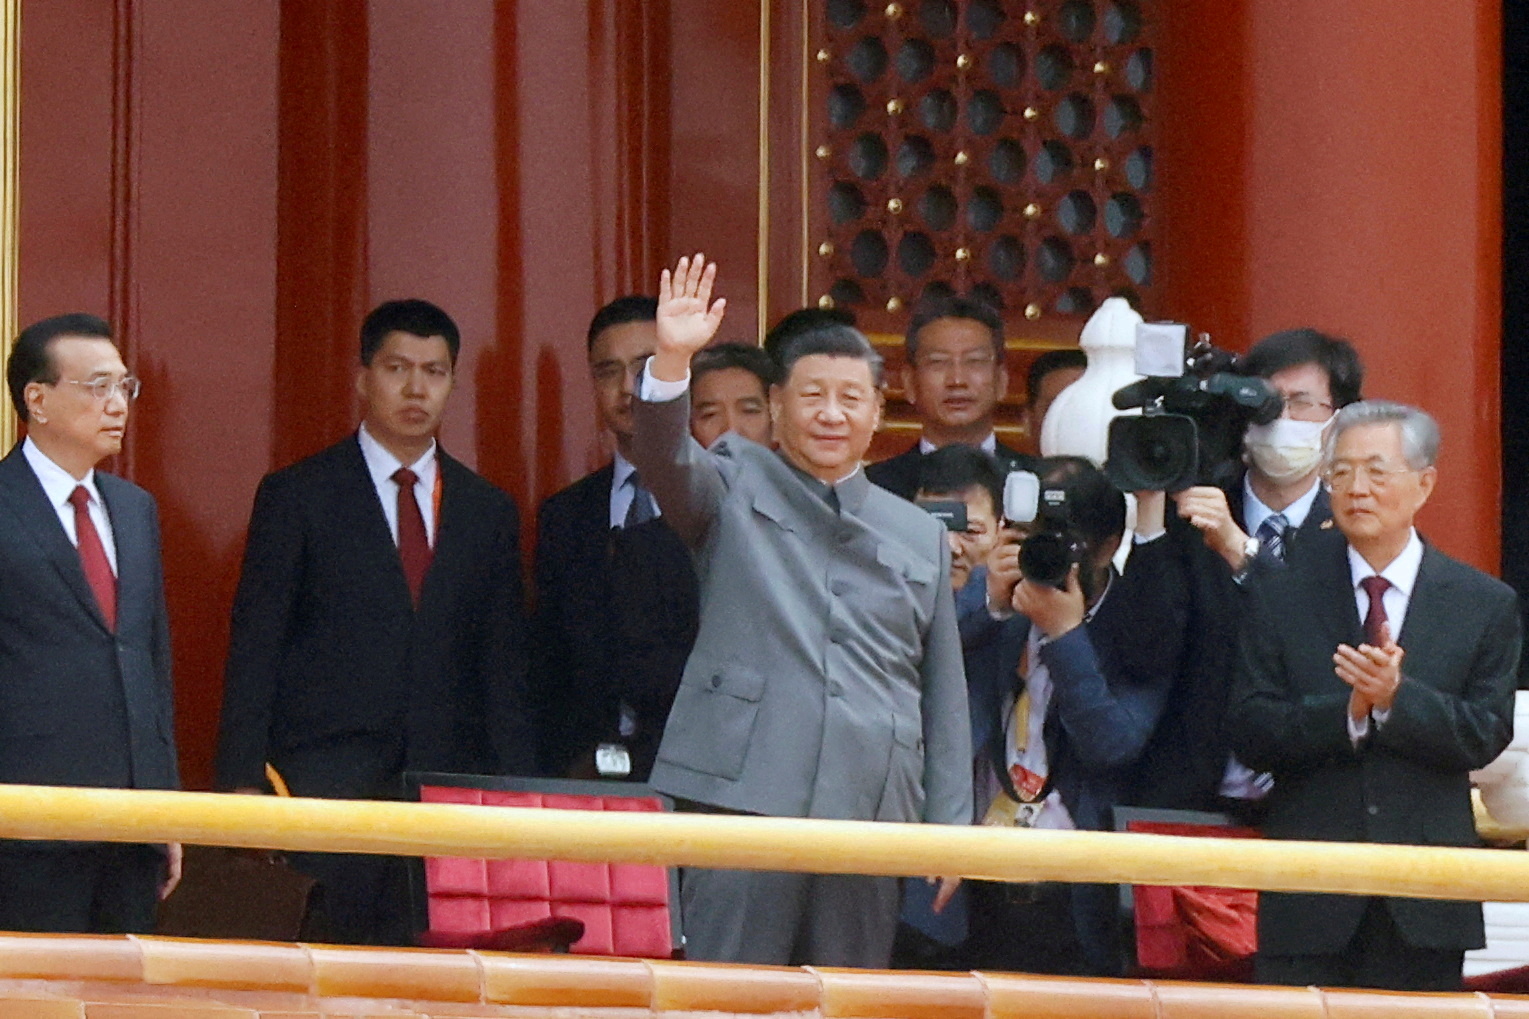 Chinese President Xi Jinping waves next to Premier Li Keqiang and former president Hu Jintao at the end of the event marking the 100th founding anniversary of the Communist Party of China